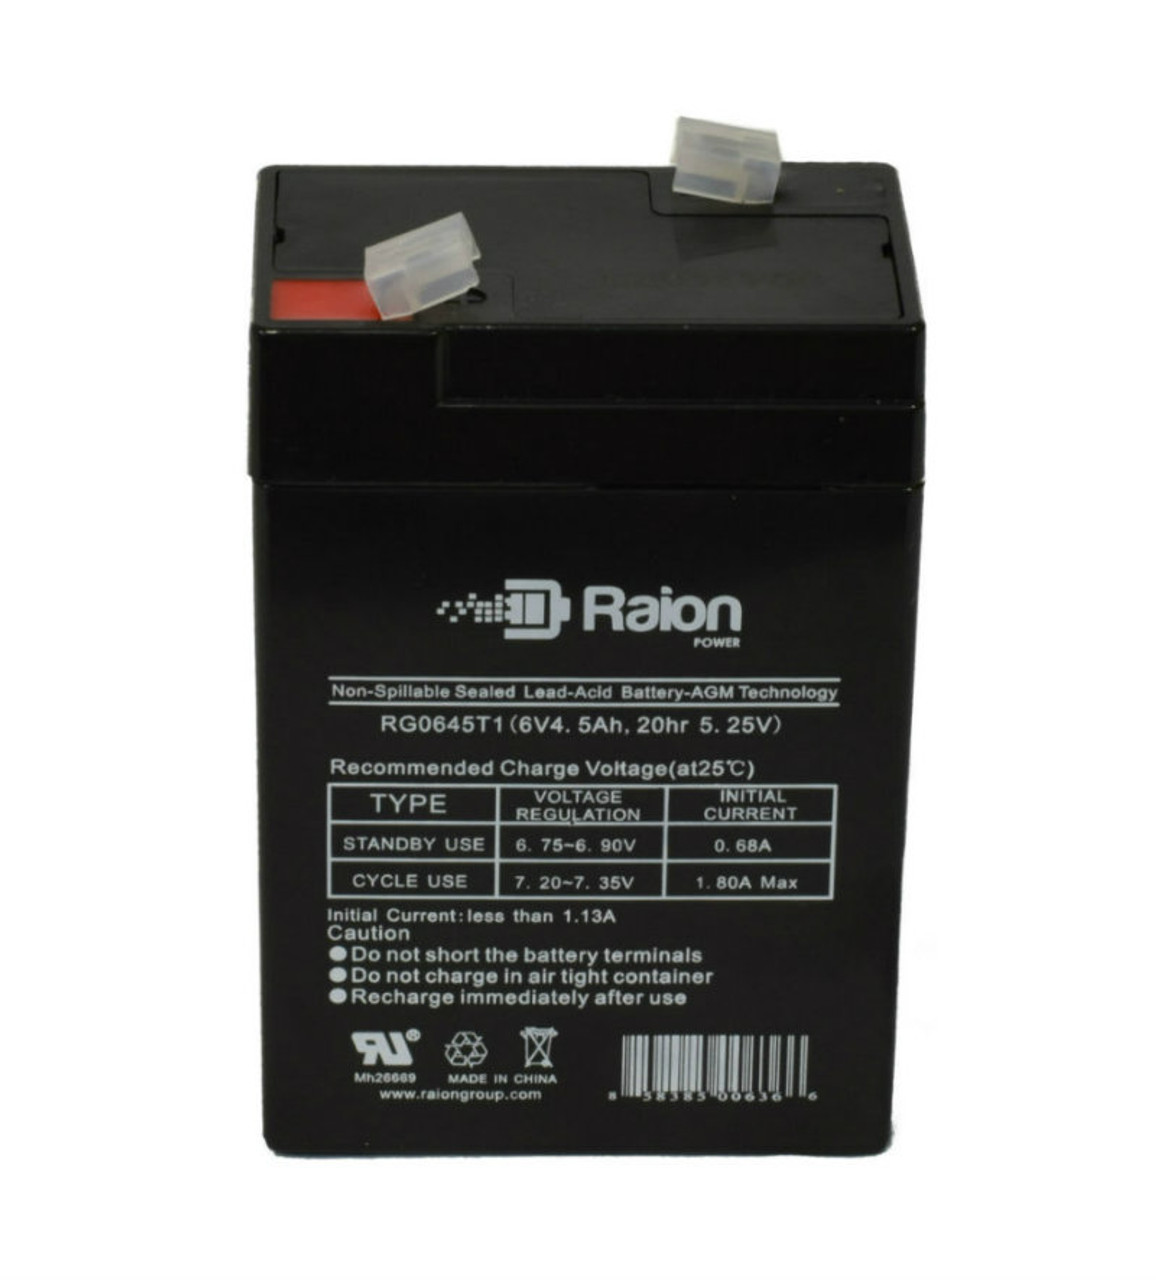 Raion Power RG0645T1 Replacement Battery Cartridge for Fengri 3-FM-5.0